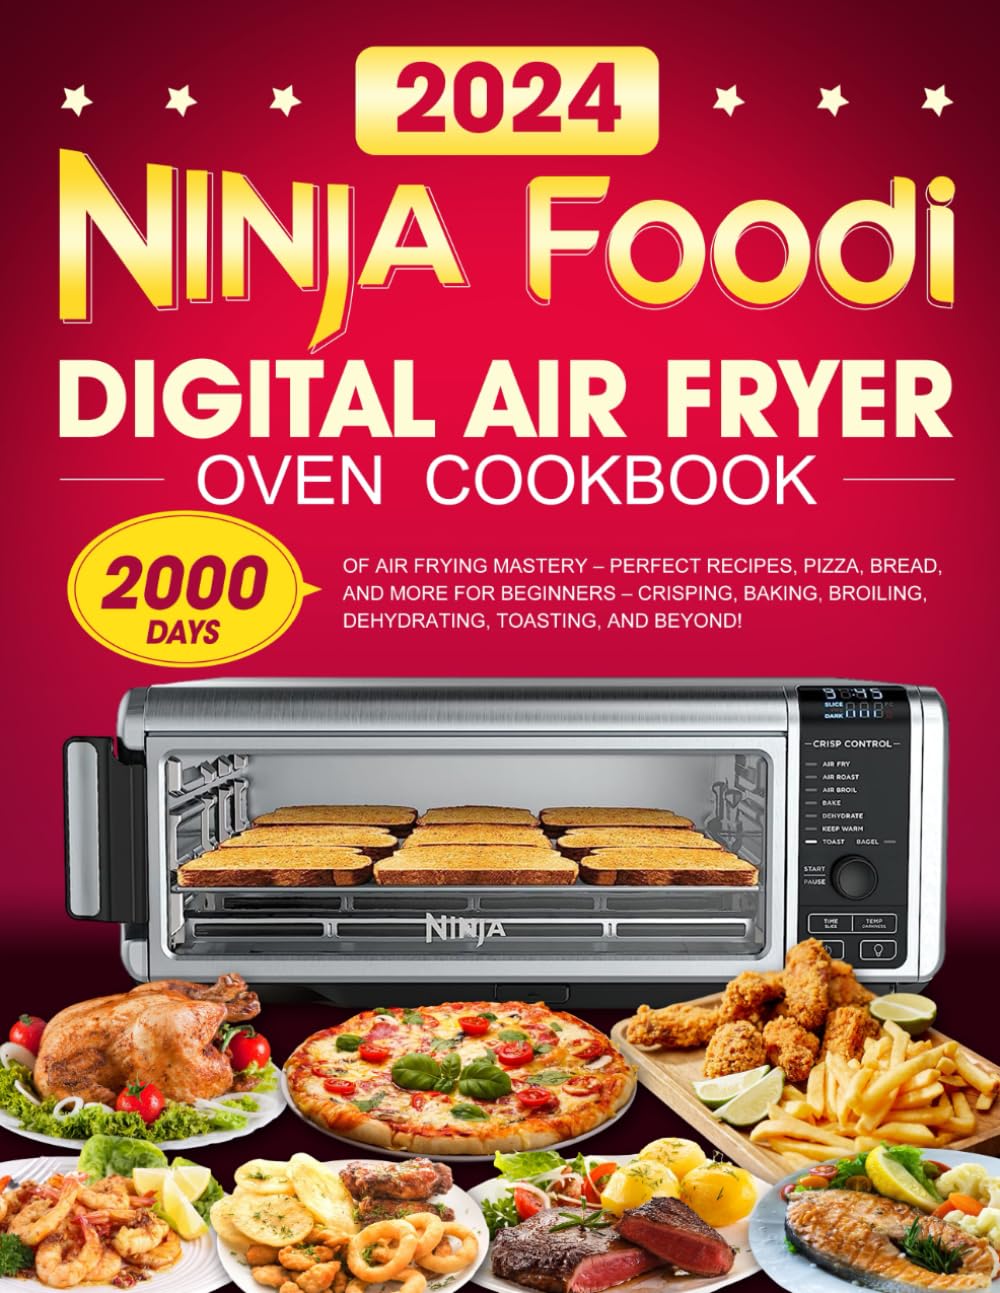 Ninja Foodi Digital Air Fryer Oven Cookbook: 2000 Days of Air Frying Mastery – Perfect Recipes, Pizza, Bread, and More for Beginners – Crisping, Baking, Broiling, Dehydrating, Toasting, and Beyond!